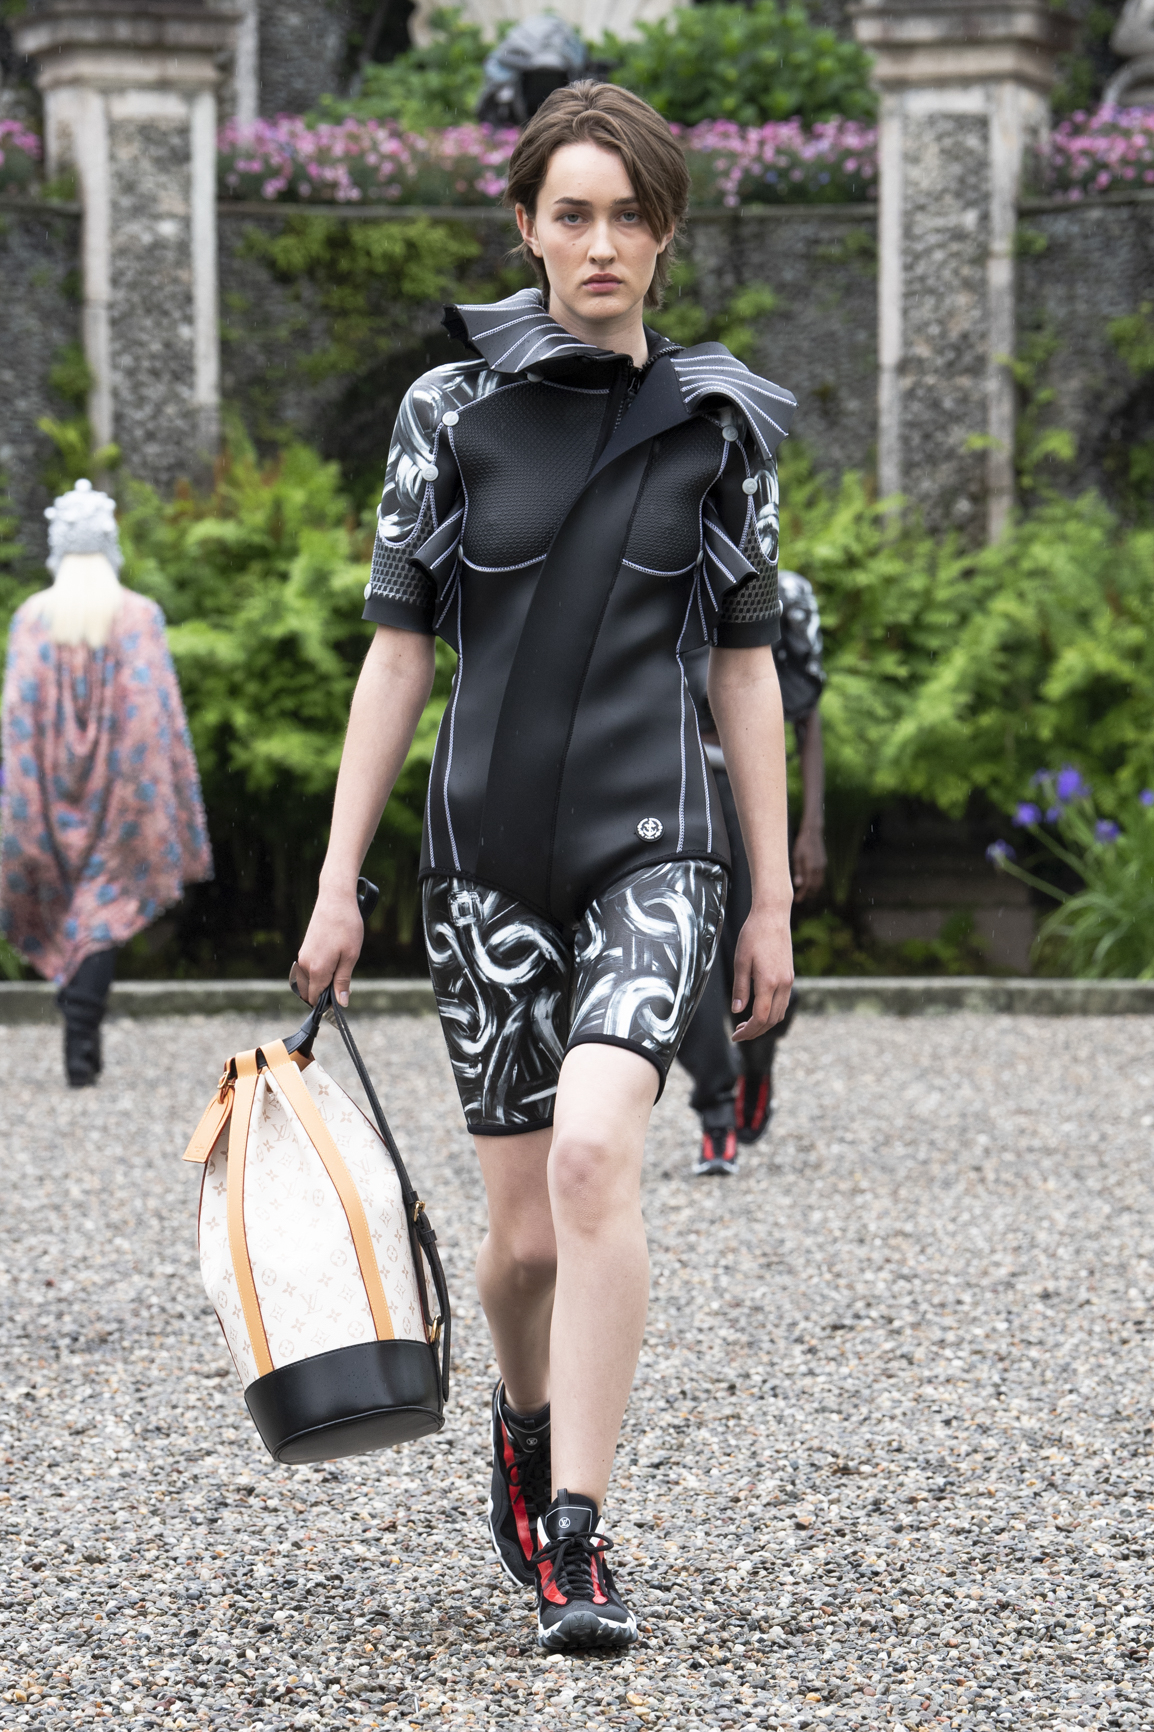 Louis Vuitton Cruise 2022 Collection, New Bags, Shoes & So Much